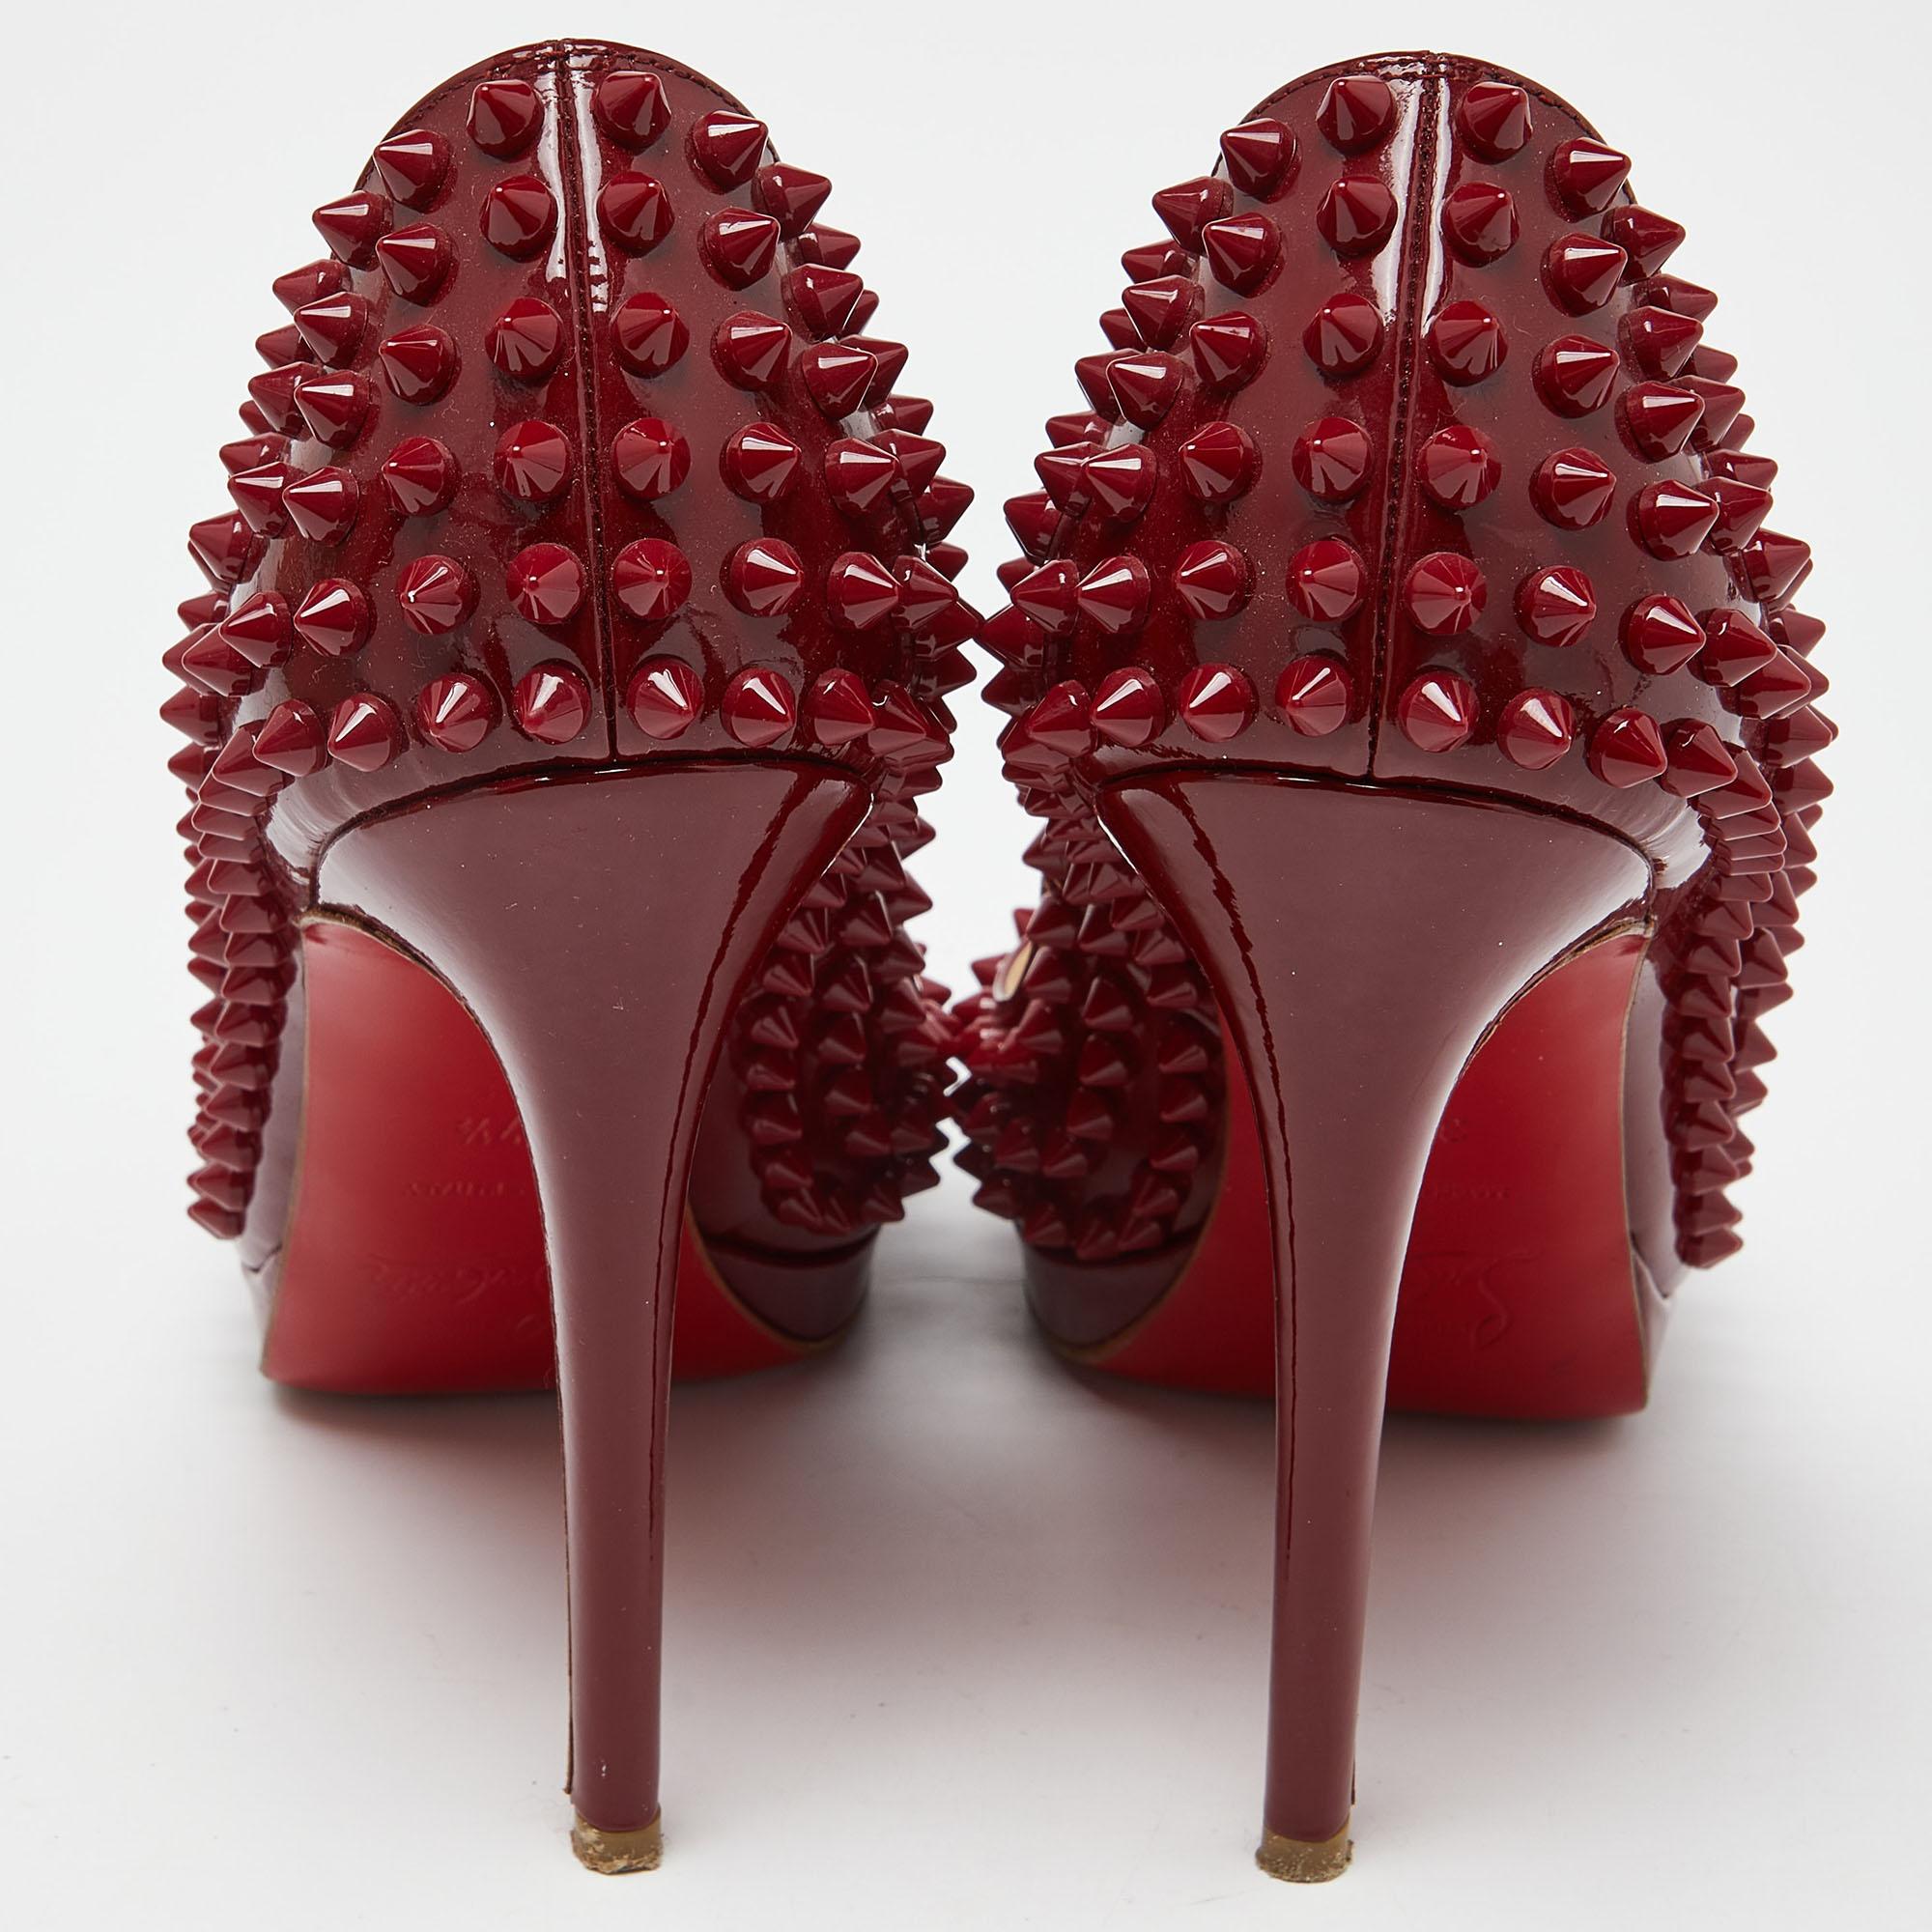 Christian Louboutin Red Patent Leather Yolanda Spiked Peep-Toe Pumps Size 37.5 In Good Condition For Sale In Dubai, Al Qouz 2